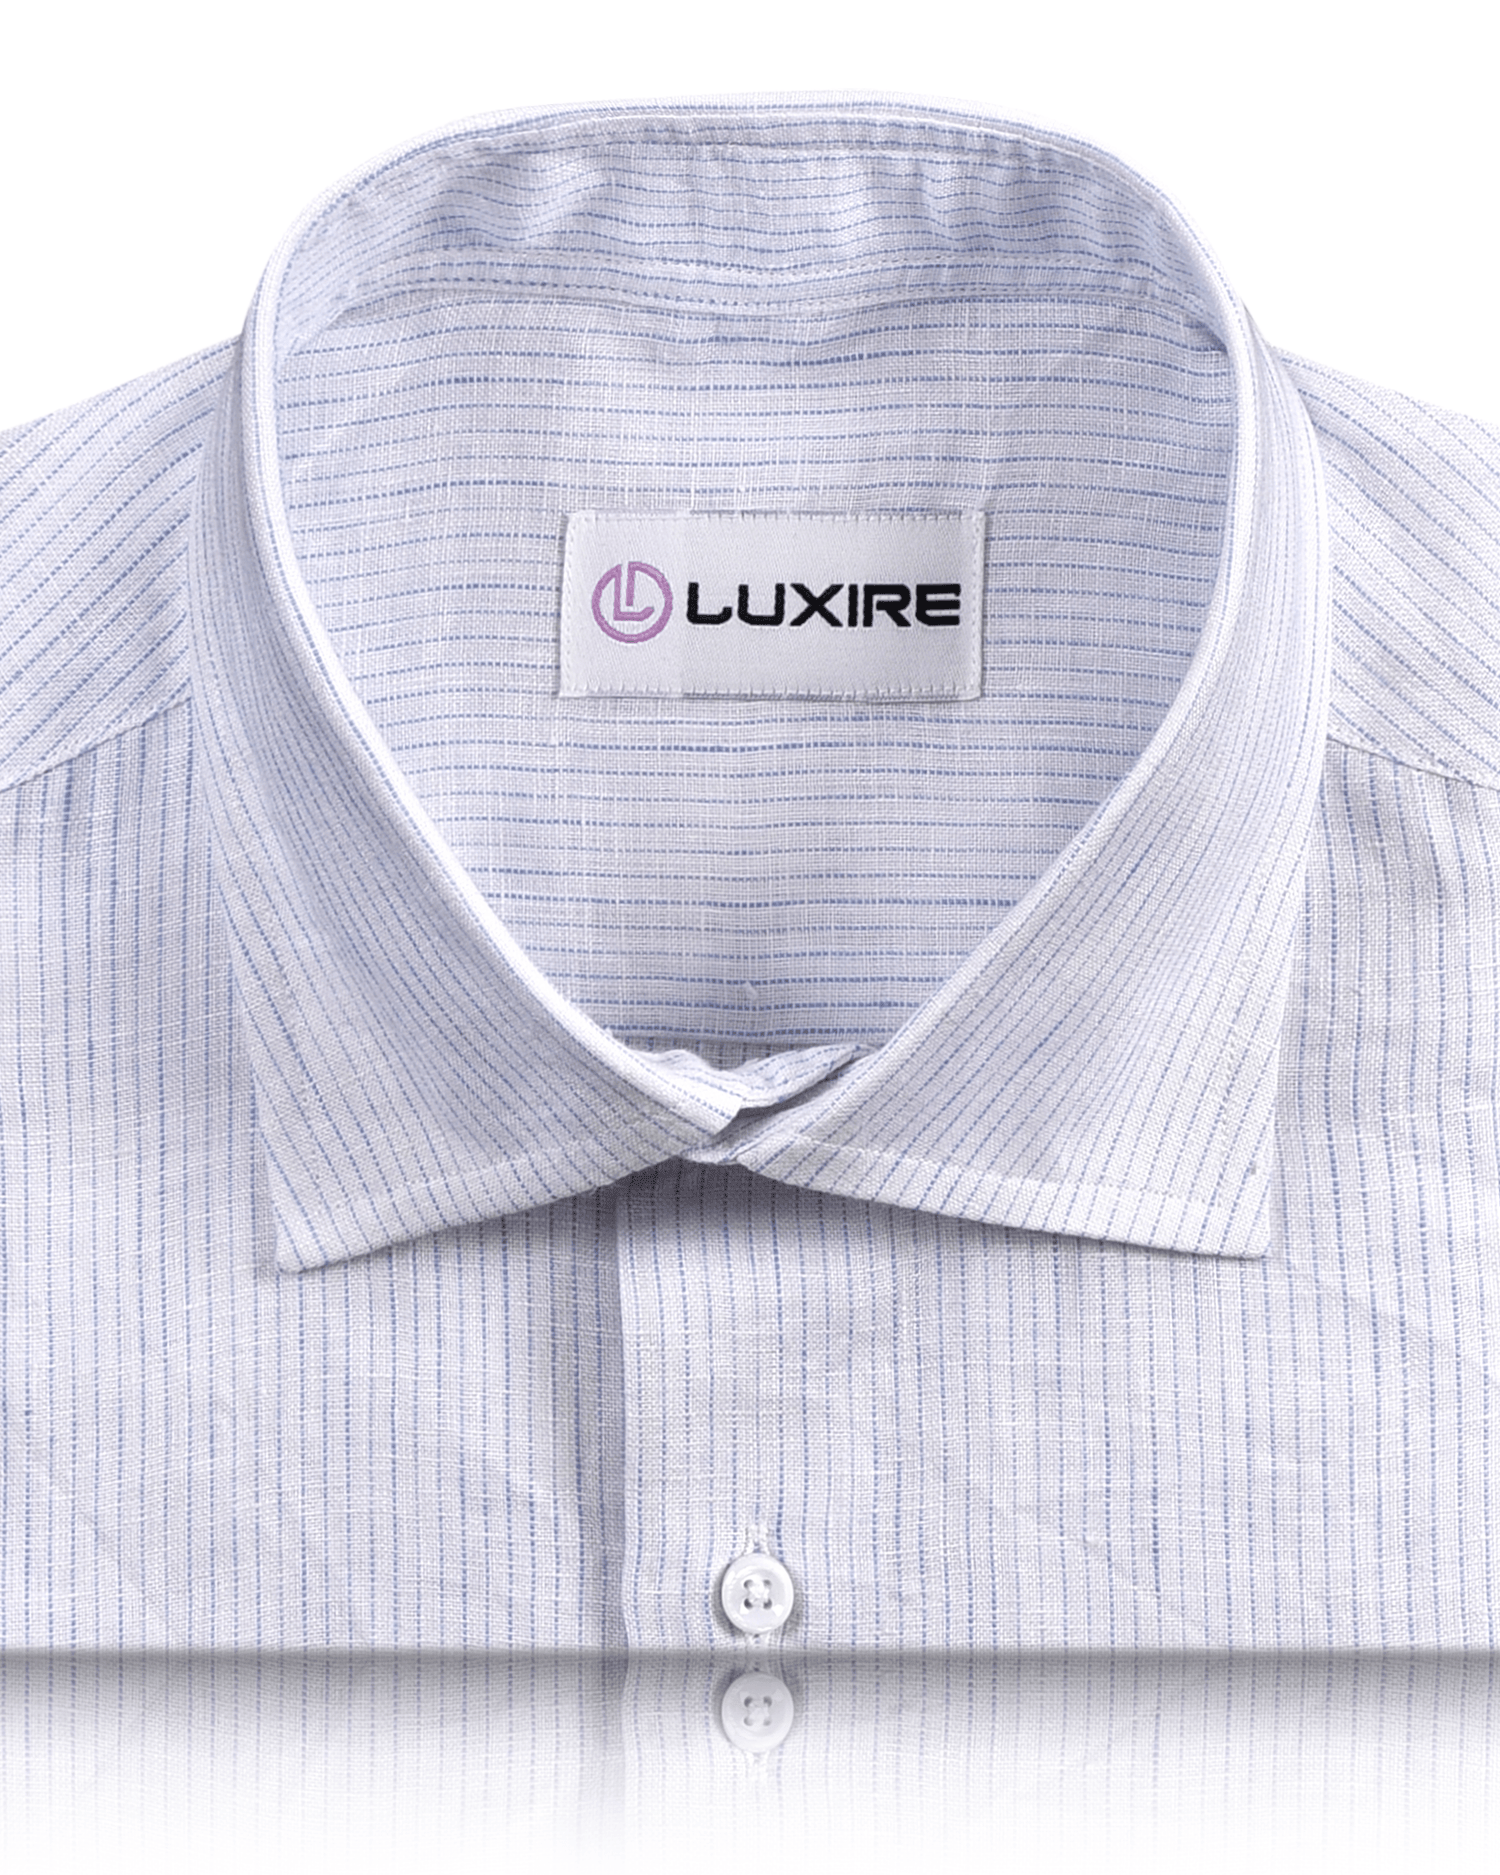 Collar of the custom linen shirt for men in white with thin blue stripes by Luxire Clothing